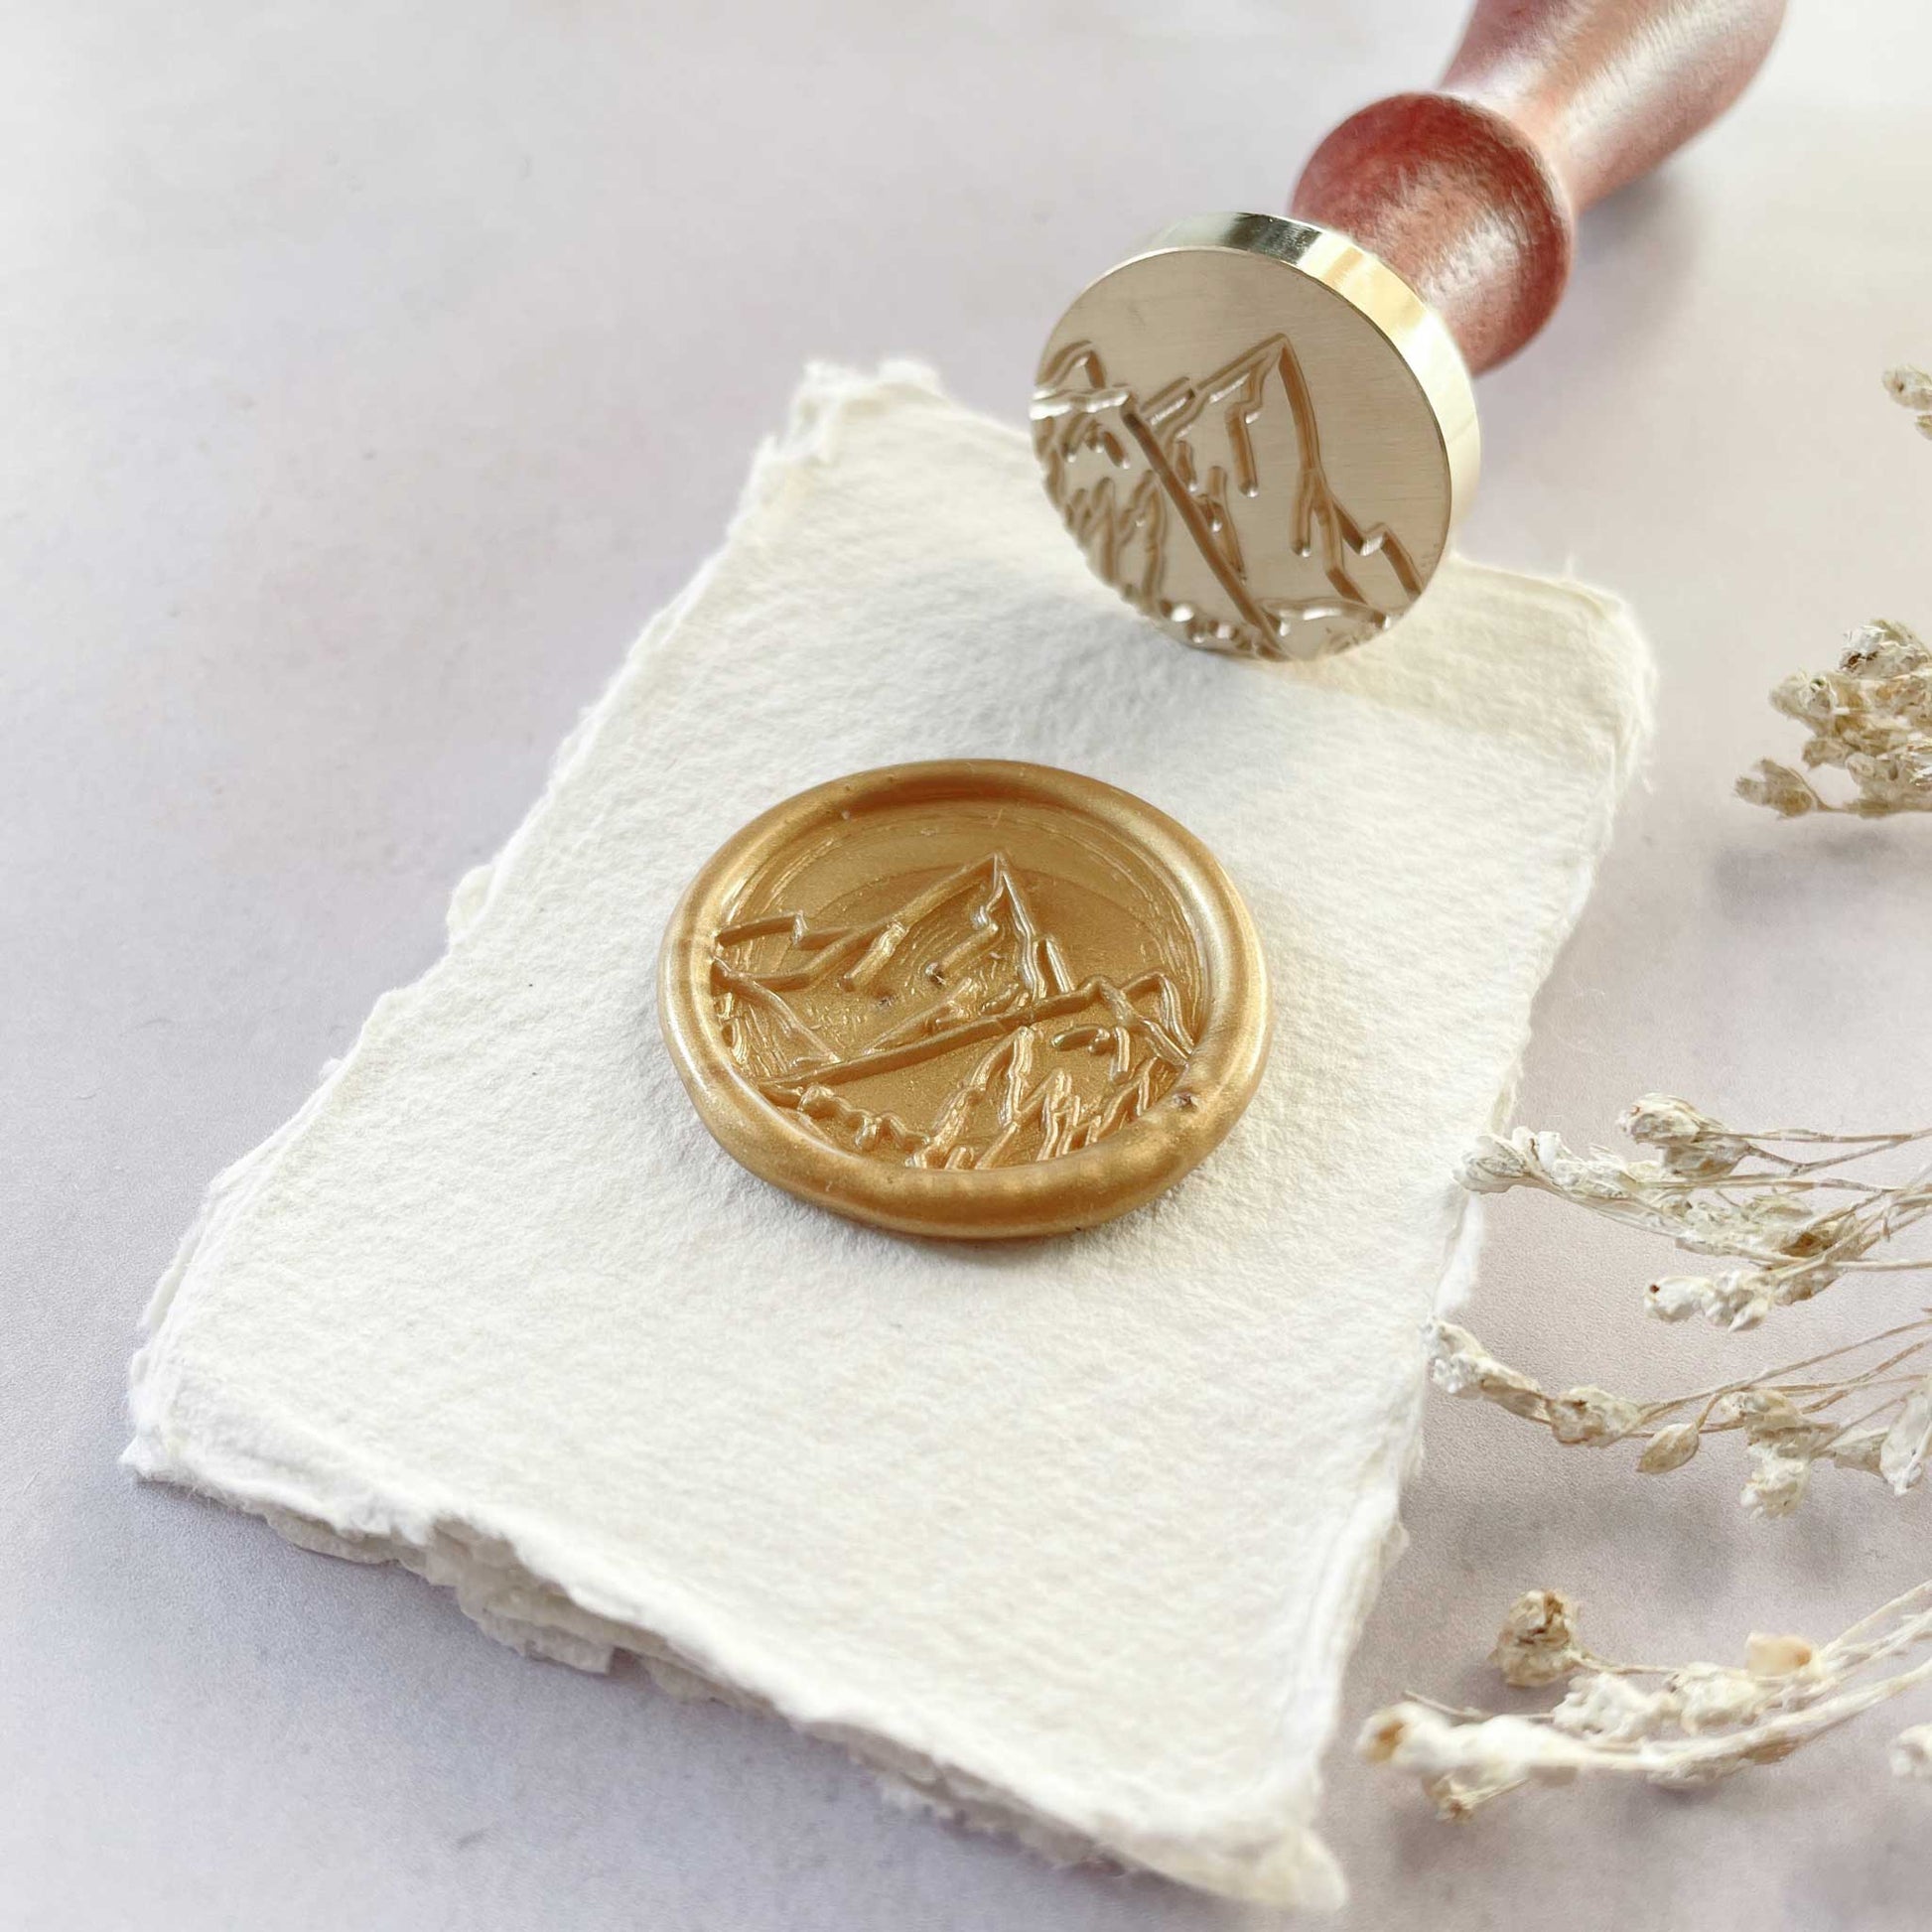 Mountain design sealing wax stamp to make wax seals.  Alps theme.  Wax seals for outdoor theme.  By The Natural Paper Company